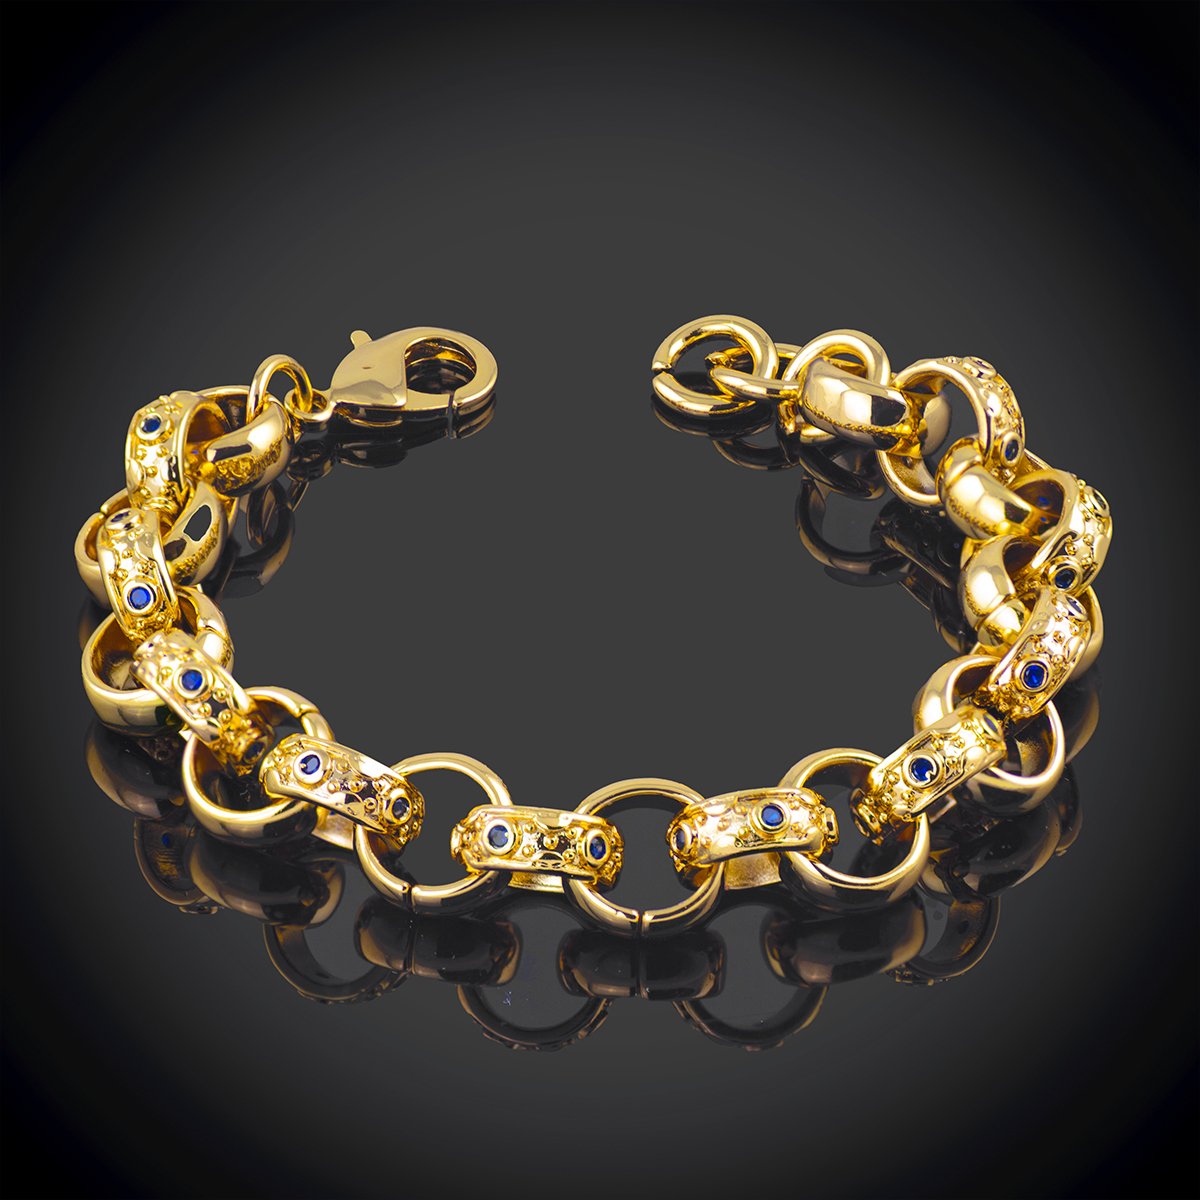 jvjewellers.co.uk/product/18ct-g…

#UrbanCollection #Urban #Jewellery #Jewellers #Gold
#GoldBonded #Belcher #Bracelet #GoldBracelet
#BelcherBracelet #KidsBracelet #ChildsBracelet
#ChildsJewellery #KidsJewellery #GiftsForKids
#Fashion #Style #Bling #Drip #ForSale